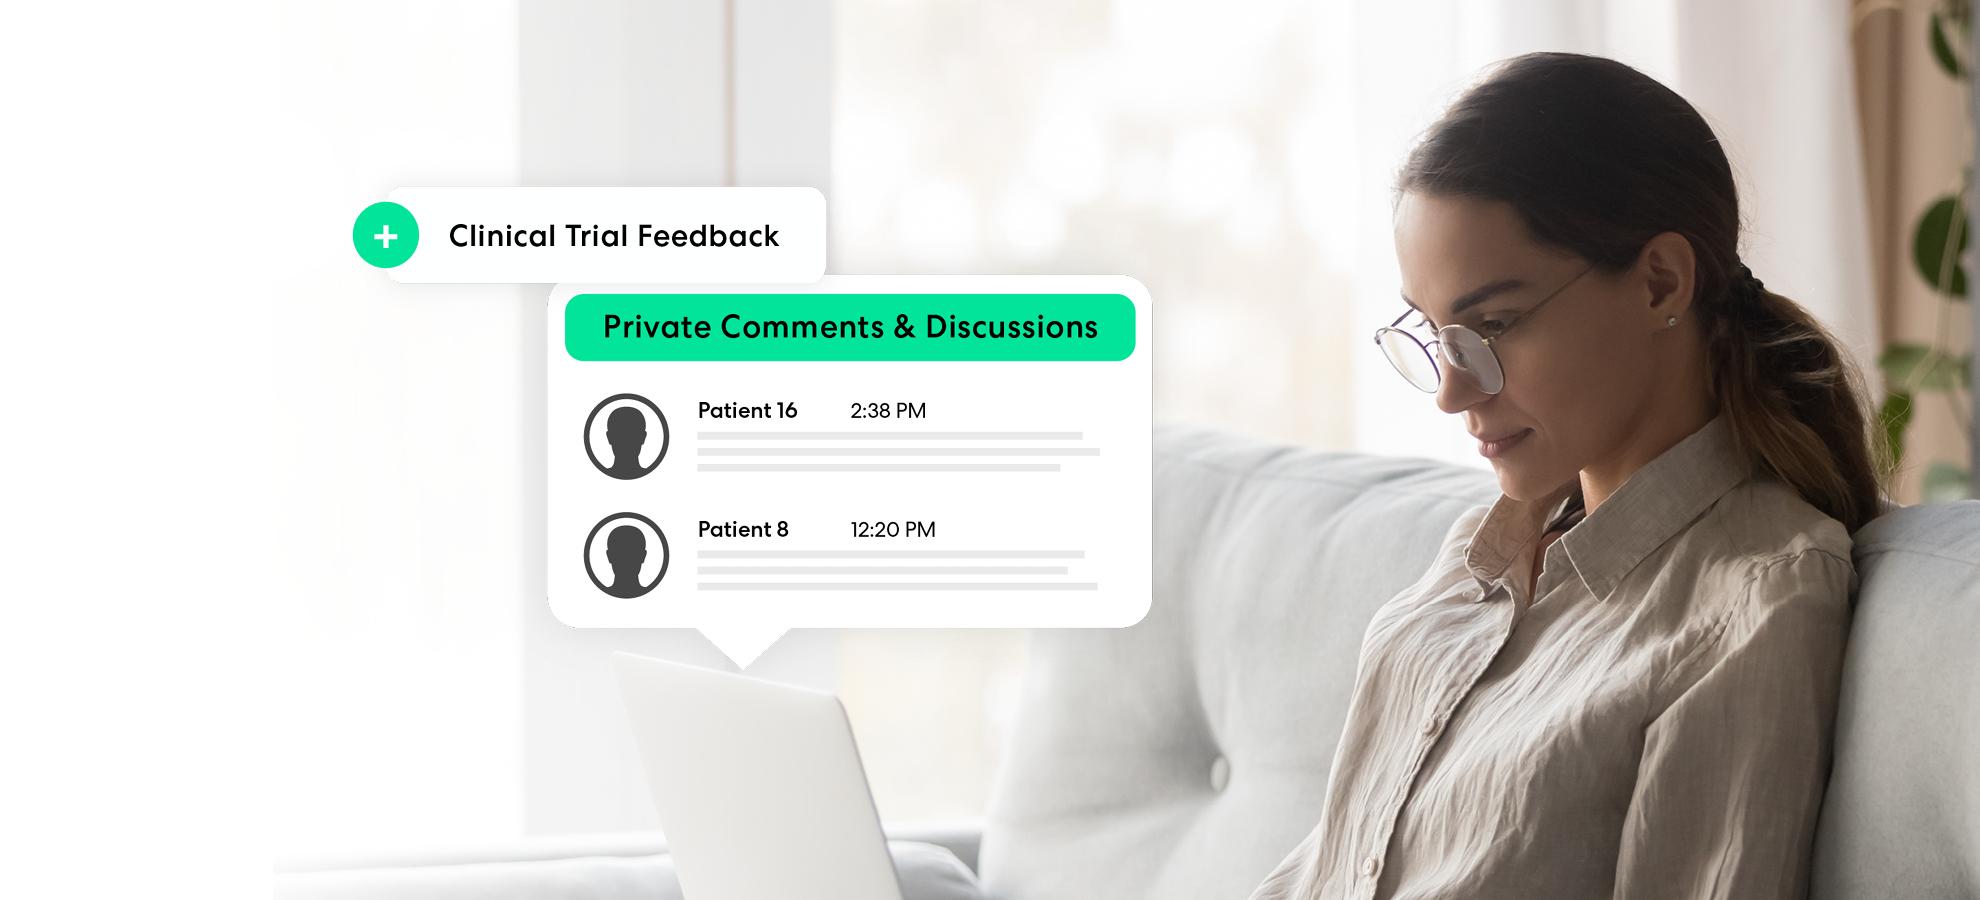 How to improve patient recruitment in clinical trials